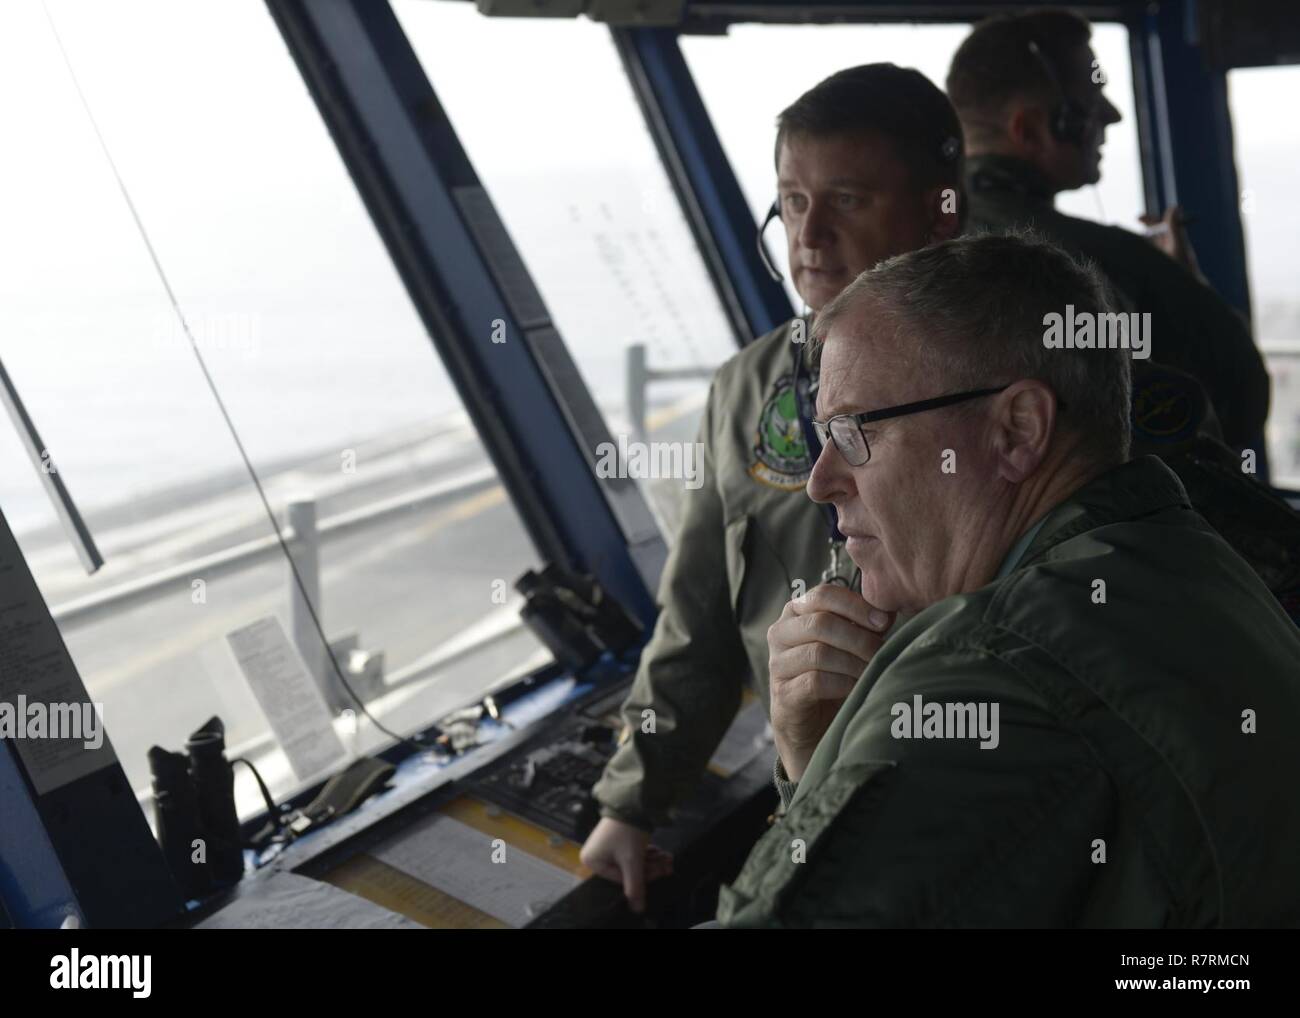 PACIFIC OCEAN (April 4, 2017) Deputy Secretary of Defense Robert Work observes flight operations aboard the aircraft carrier USS Nimitz (CVN 68). Nimitz is currently underway conducting Composite Training Unit Exercise (COMPTUEX) with the Nimitz Carrier Strike Group in preparation for an upcoming deployment. COMPTUEX tests a carrier strike group's mission-readiness and ability to perform as an integrated unit through simulated real-world scenarios. Stock Photo